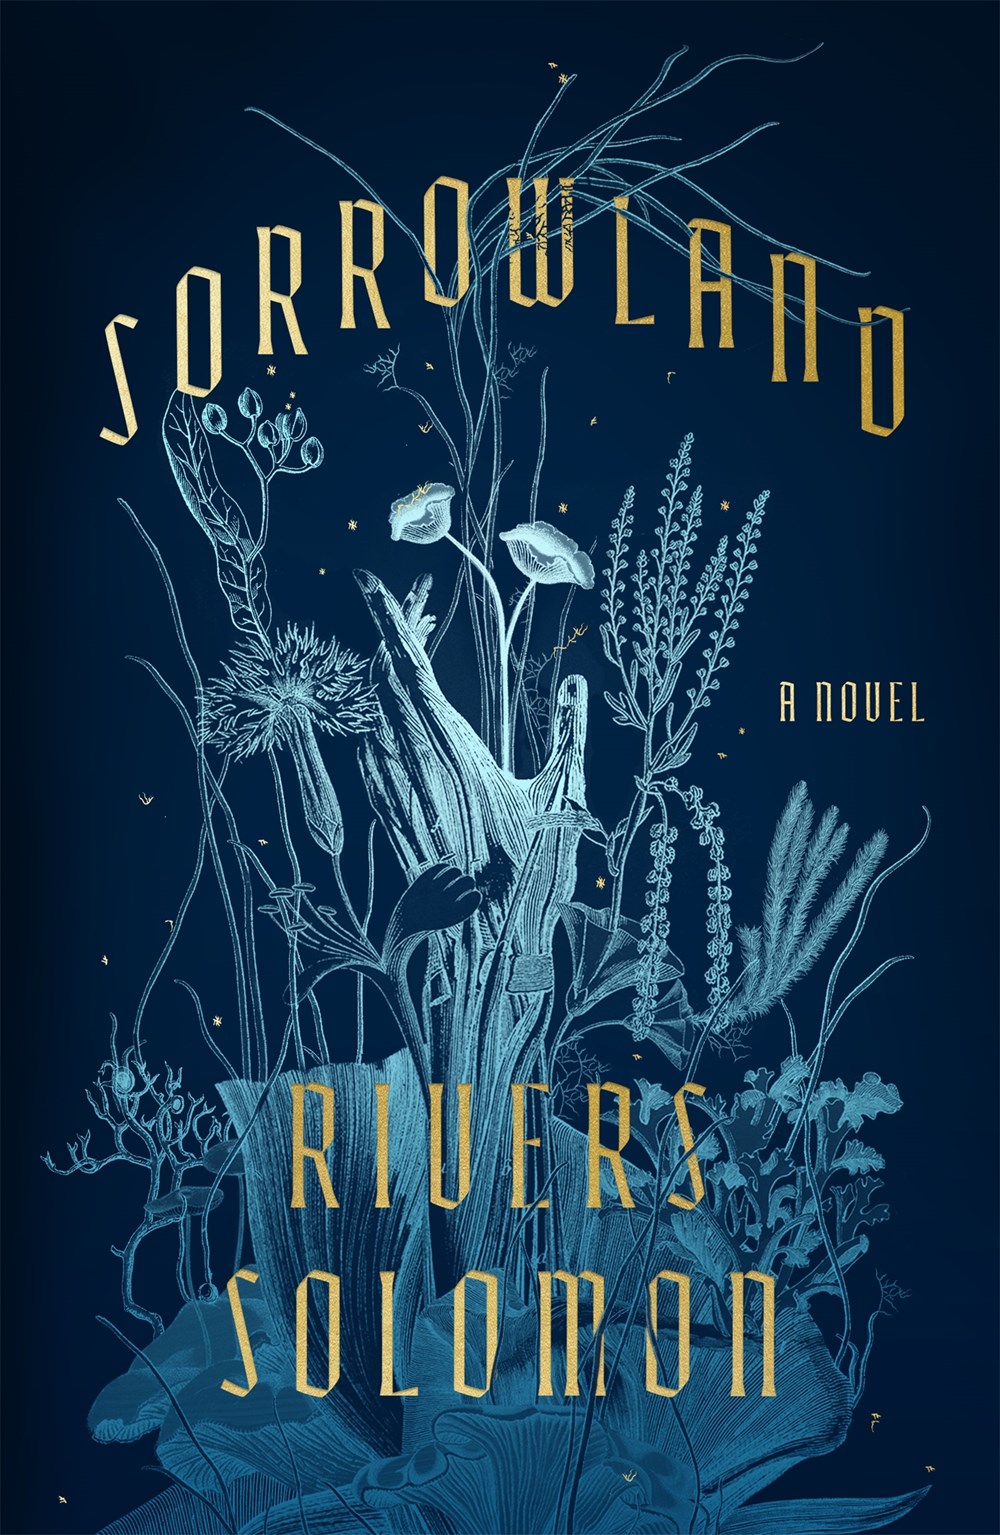 Image for "Sorrowland"